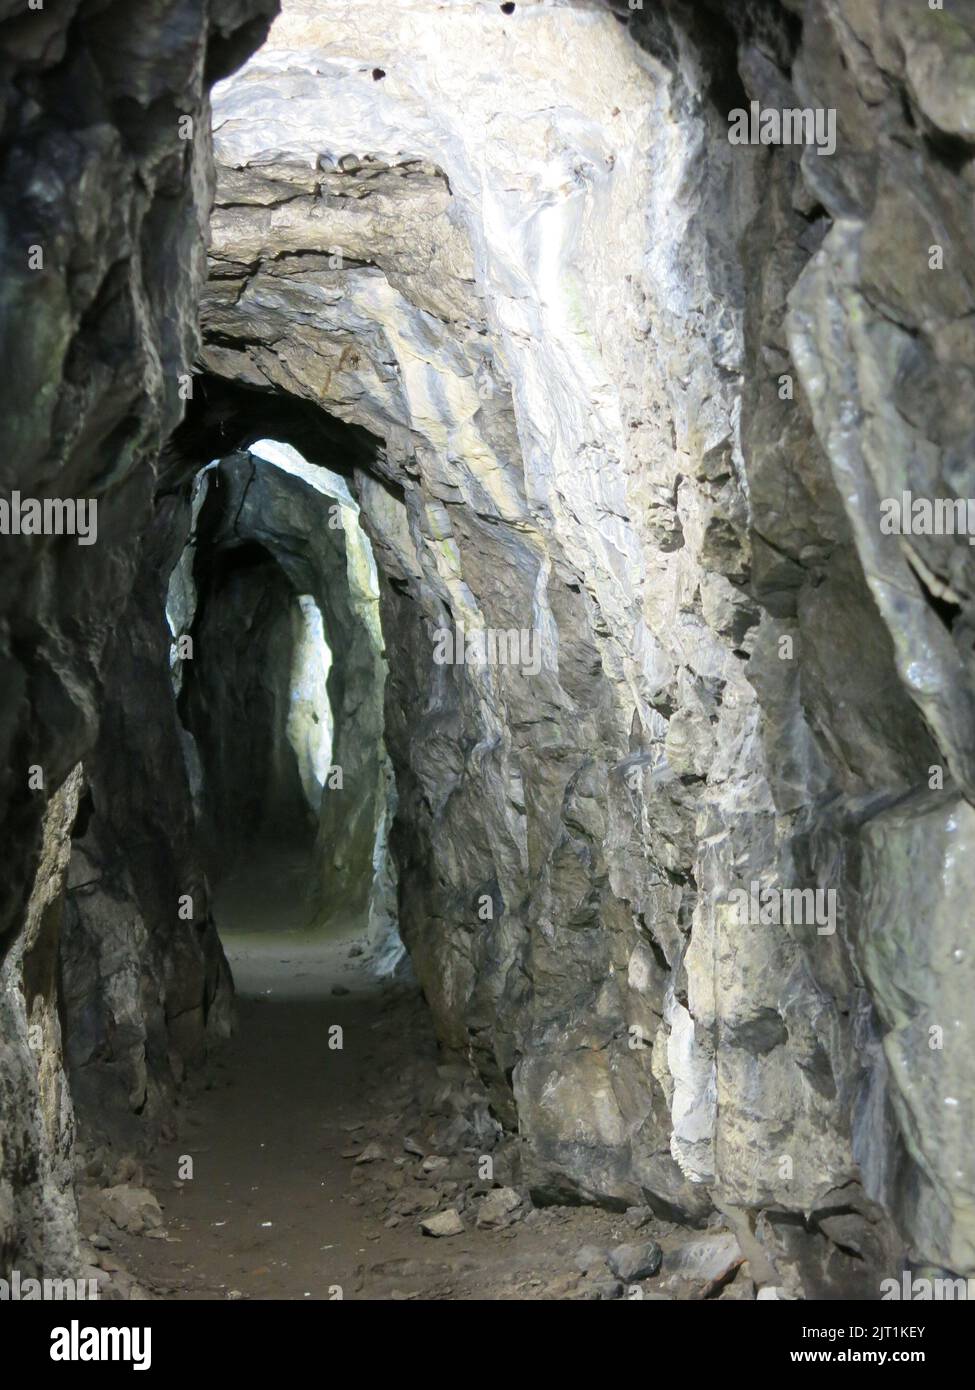 View inside the adit, or horizontal rock tunnel, which visitors can walk through for some distance at the Old Lead Mine, Cascades Gardens, Derbyshire. Stock Photo